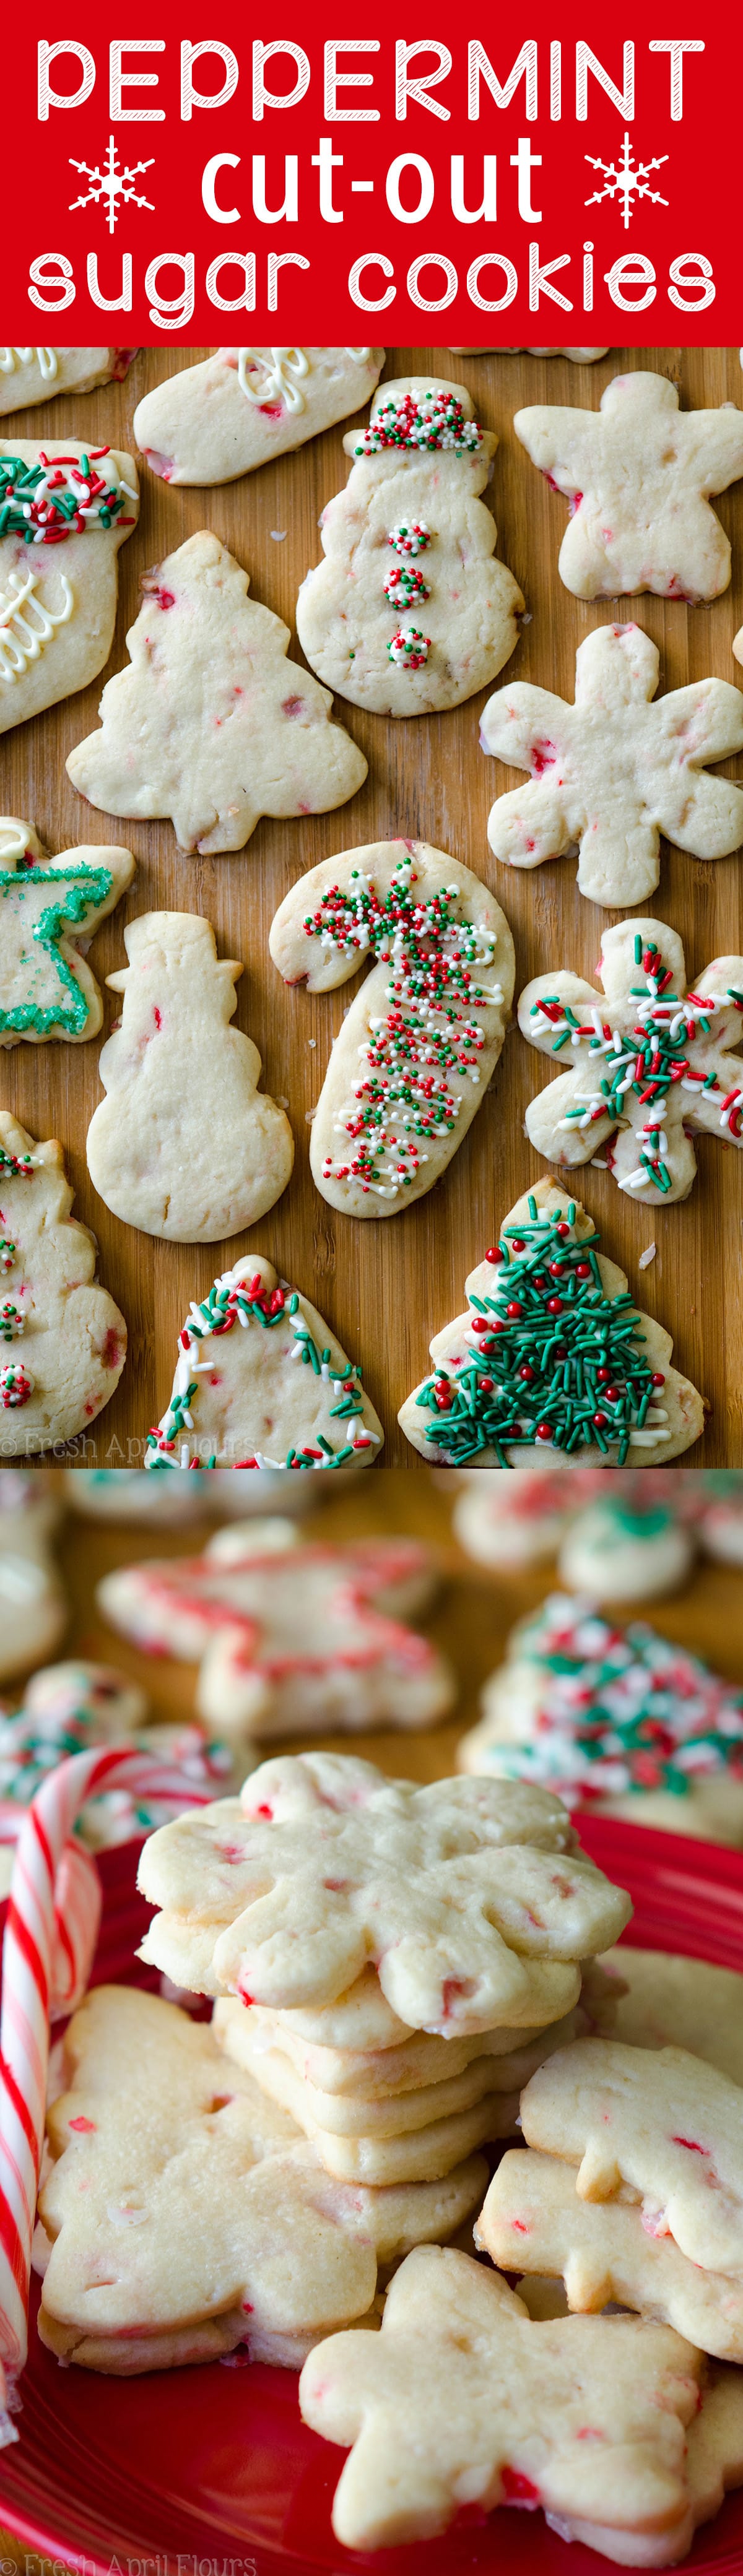 Peppermint Cut-Out Sugar Cookies: No dough chilling necessary for these soft cut-out sugar cookies that are perfect for decorating with chocolate, icing, or sprinkles. Crisp edges, soft centers, and filled with bits of candy canes! via @frshaprilflours